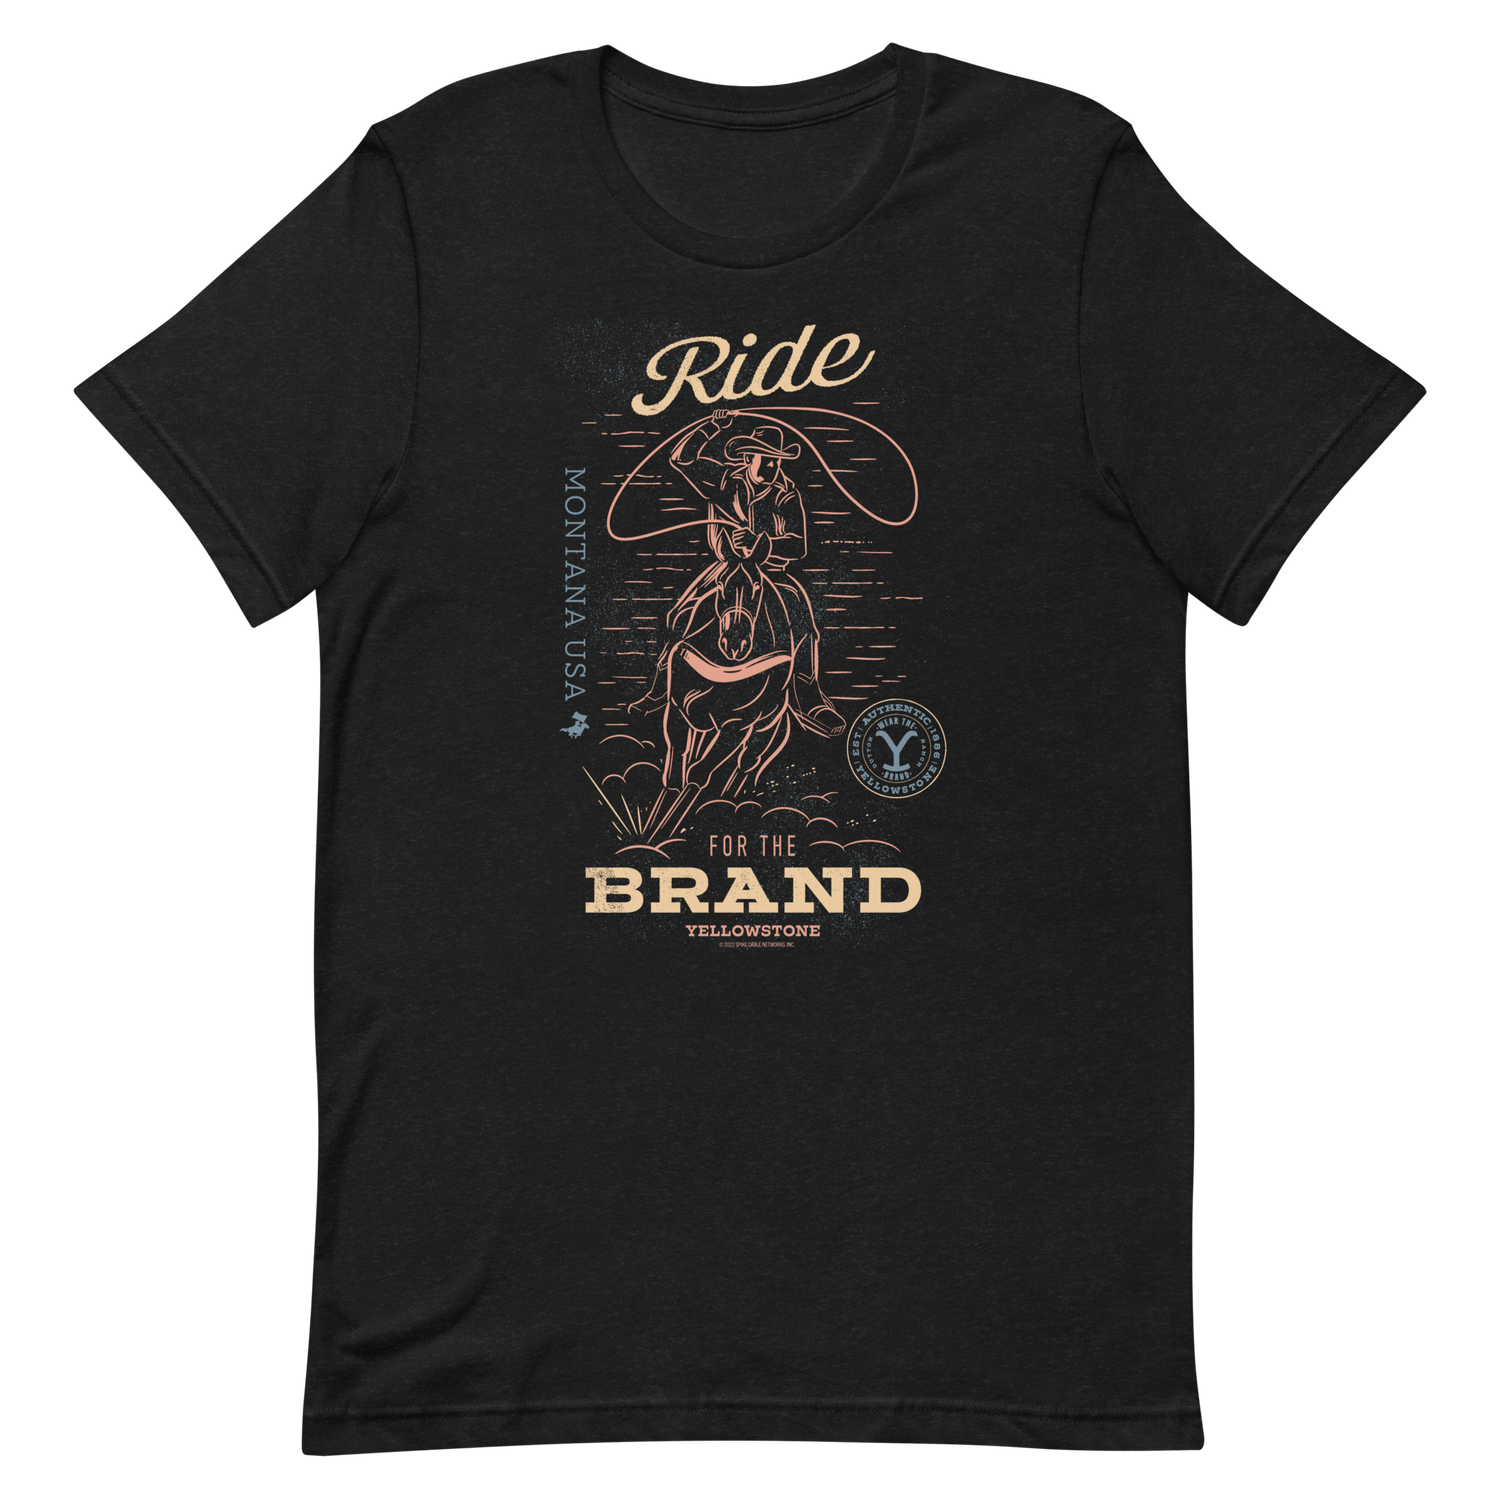 Yellowstone Ride for the Brand Adult Short Sleeve T - Shirt - Paramount Shop